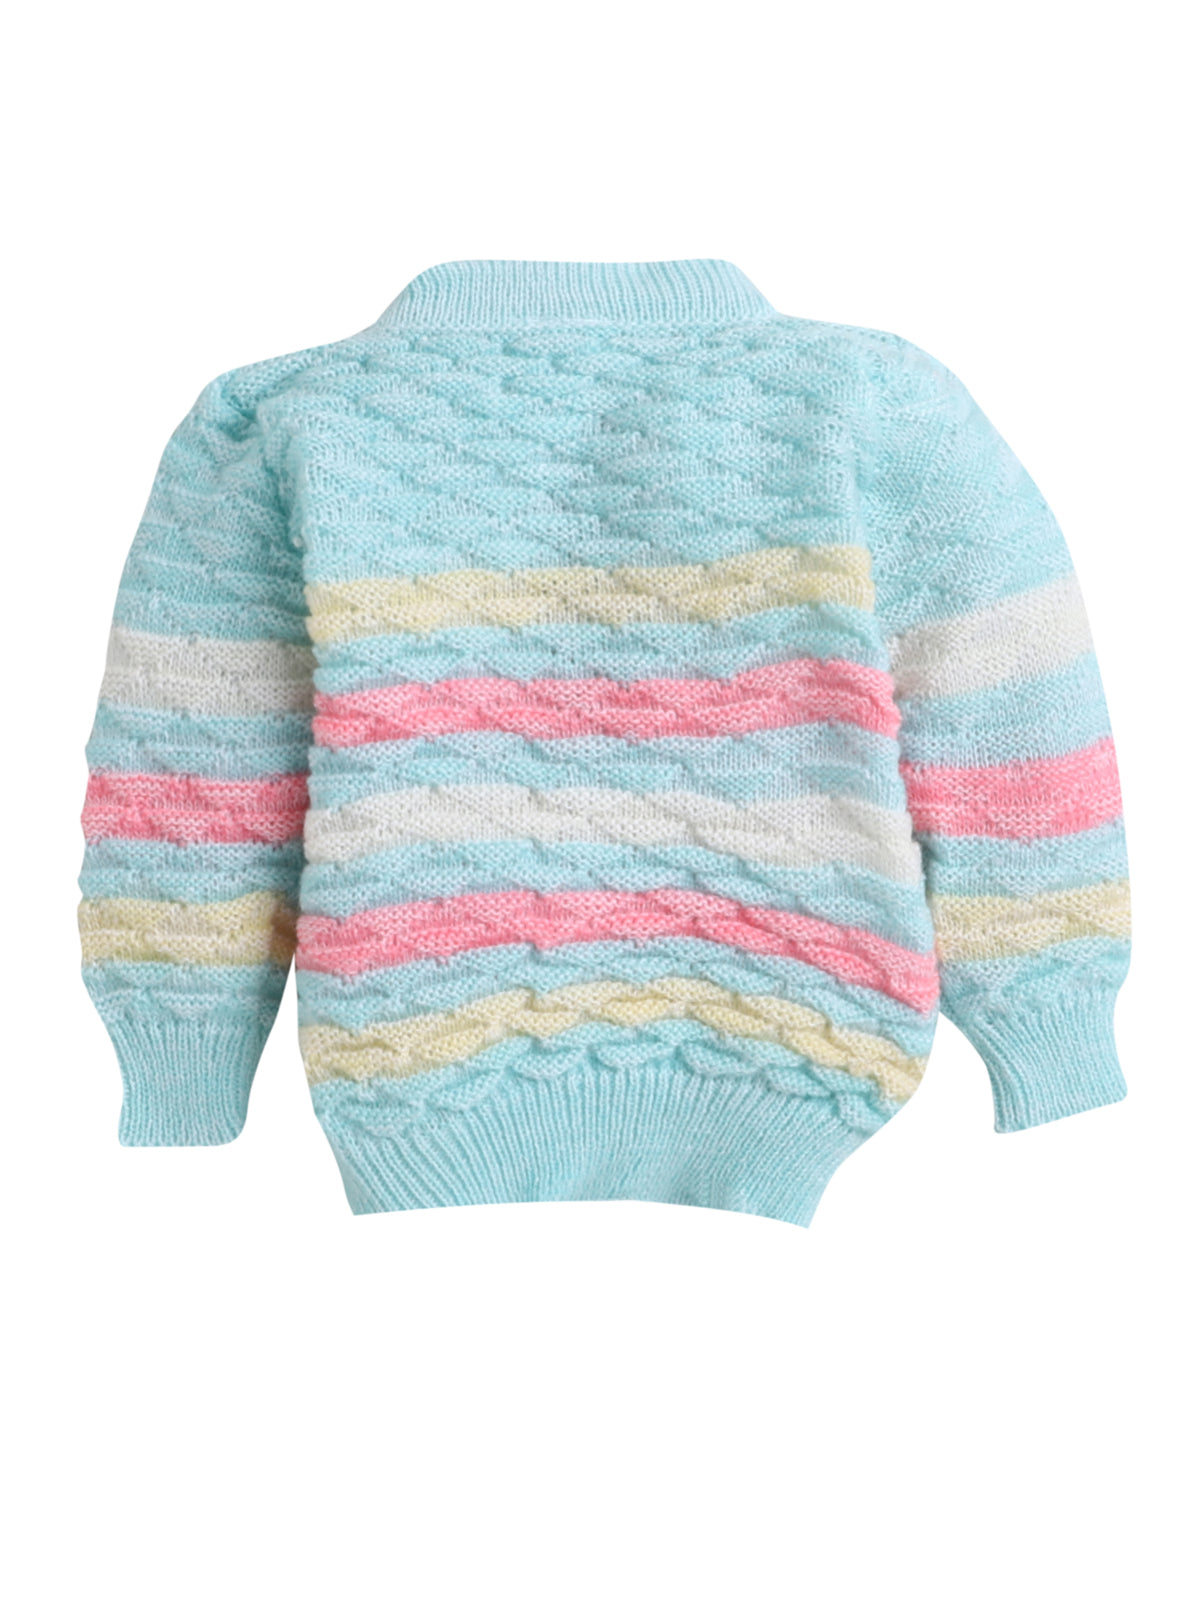 Front open Green Color Stripe Crayon Pattern Sweater with Caps and Pair of Socks